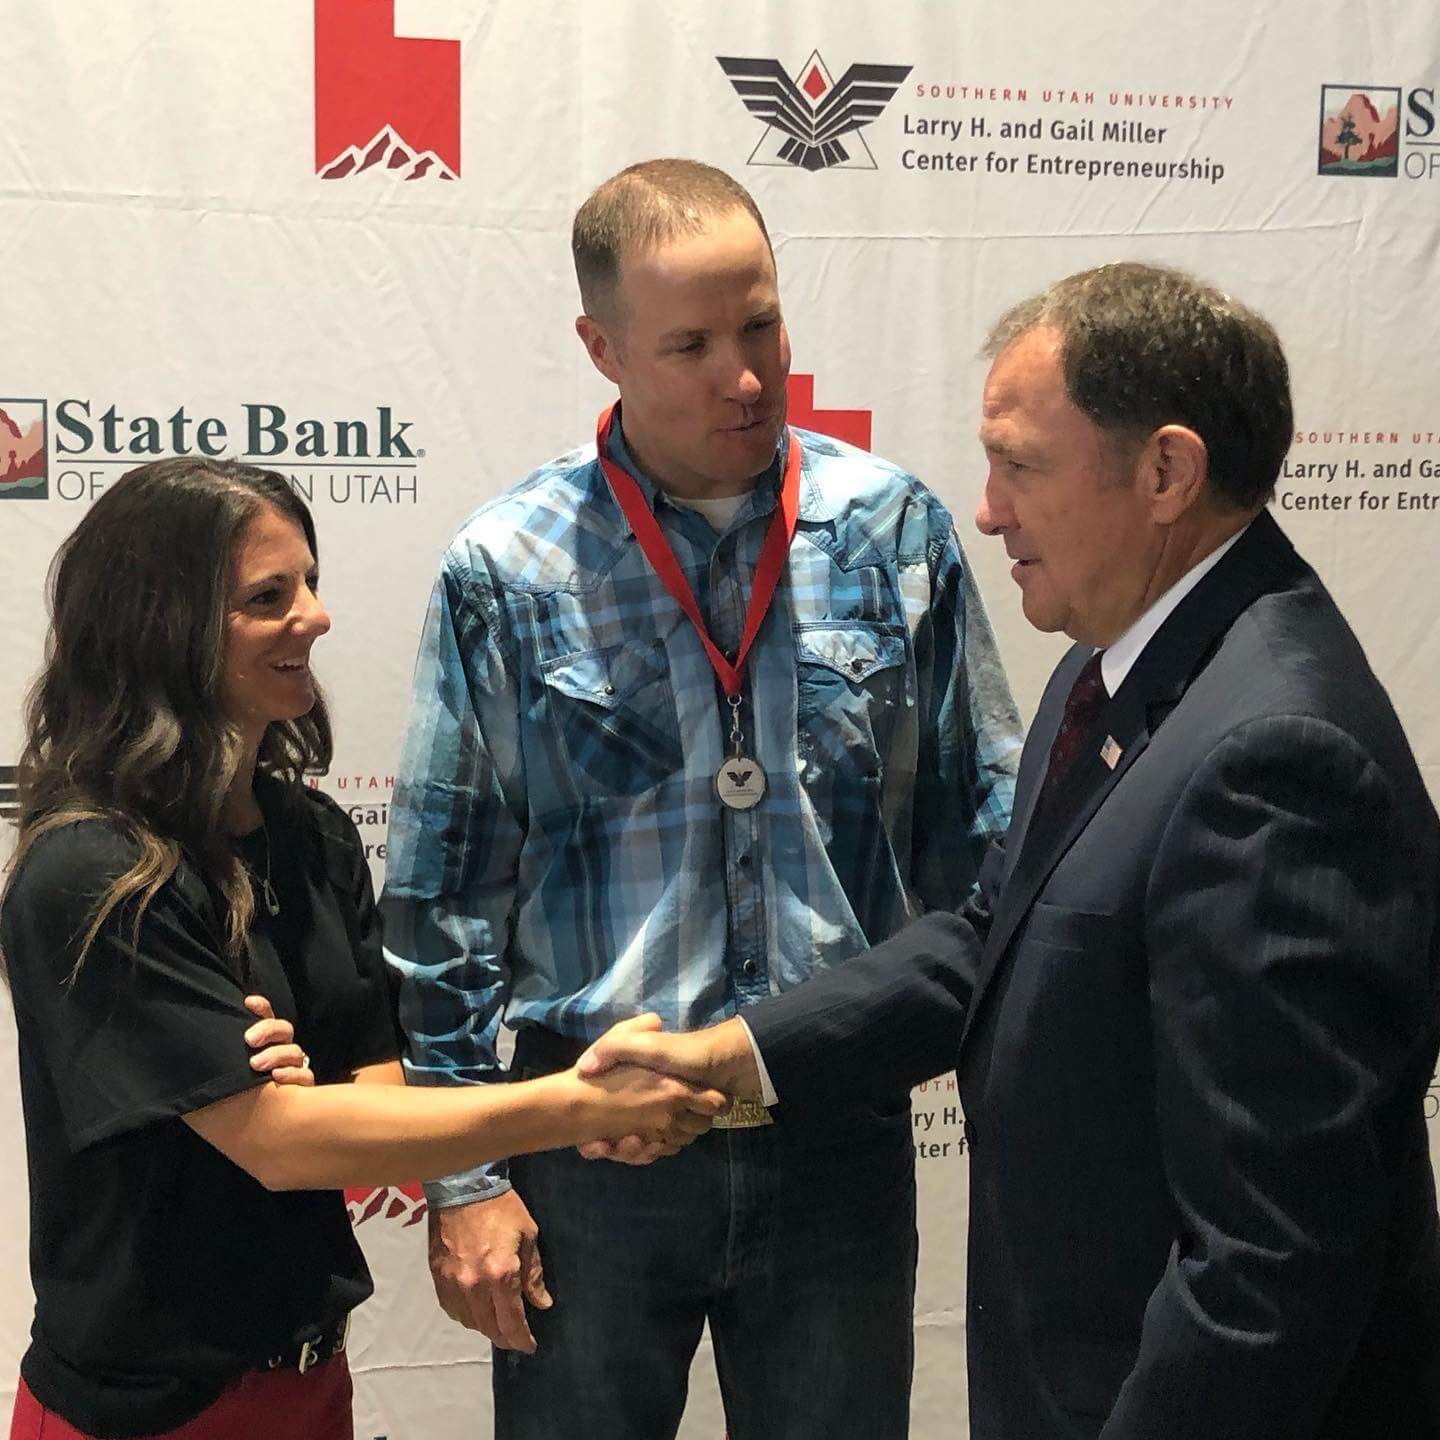 LeeAnn and Mike shake hands with the governor